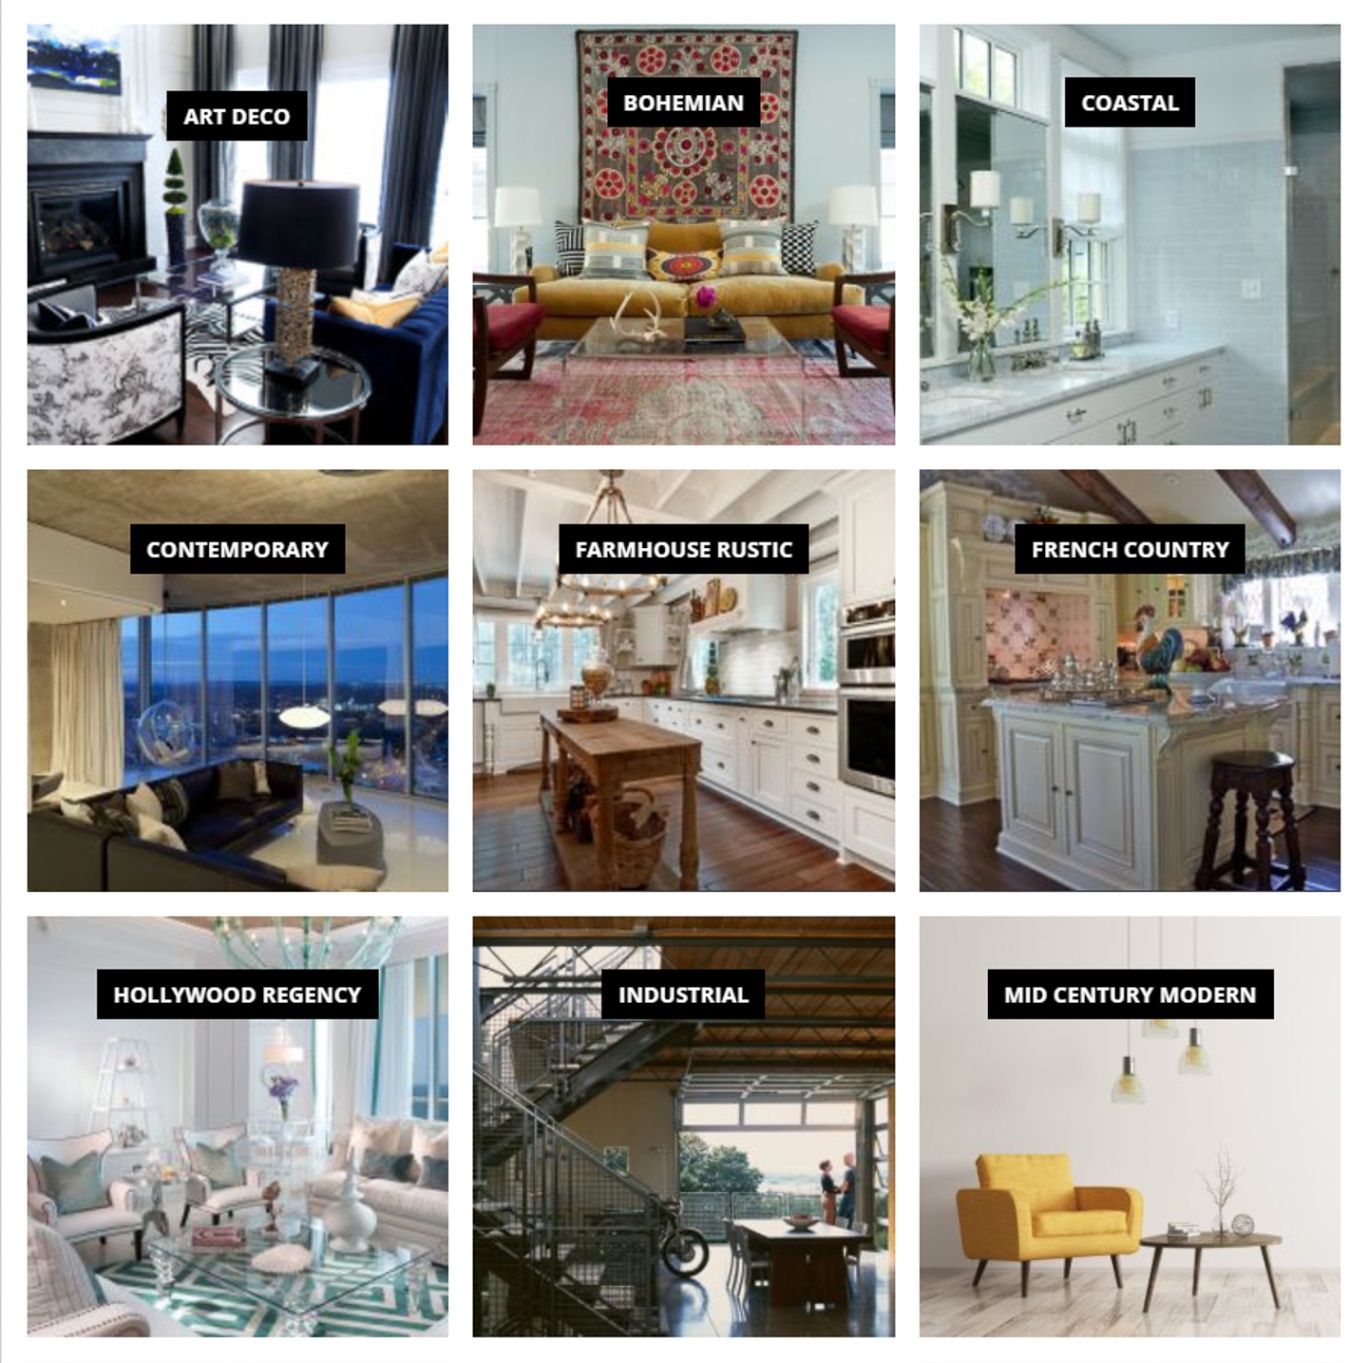 Get Inspired: Explore The Coolest Interior Design Styles For Your Home